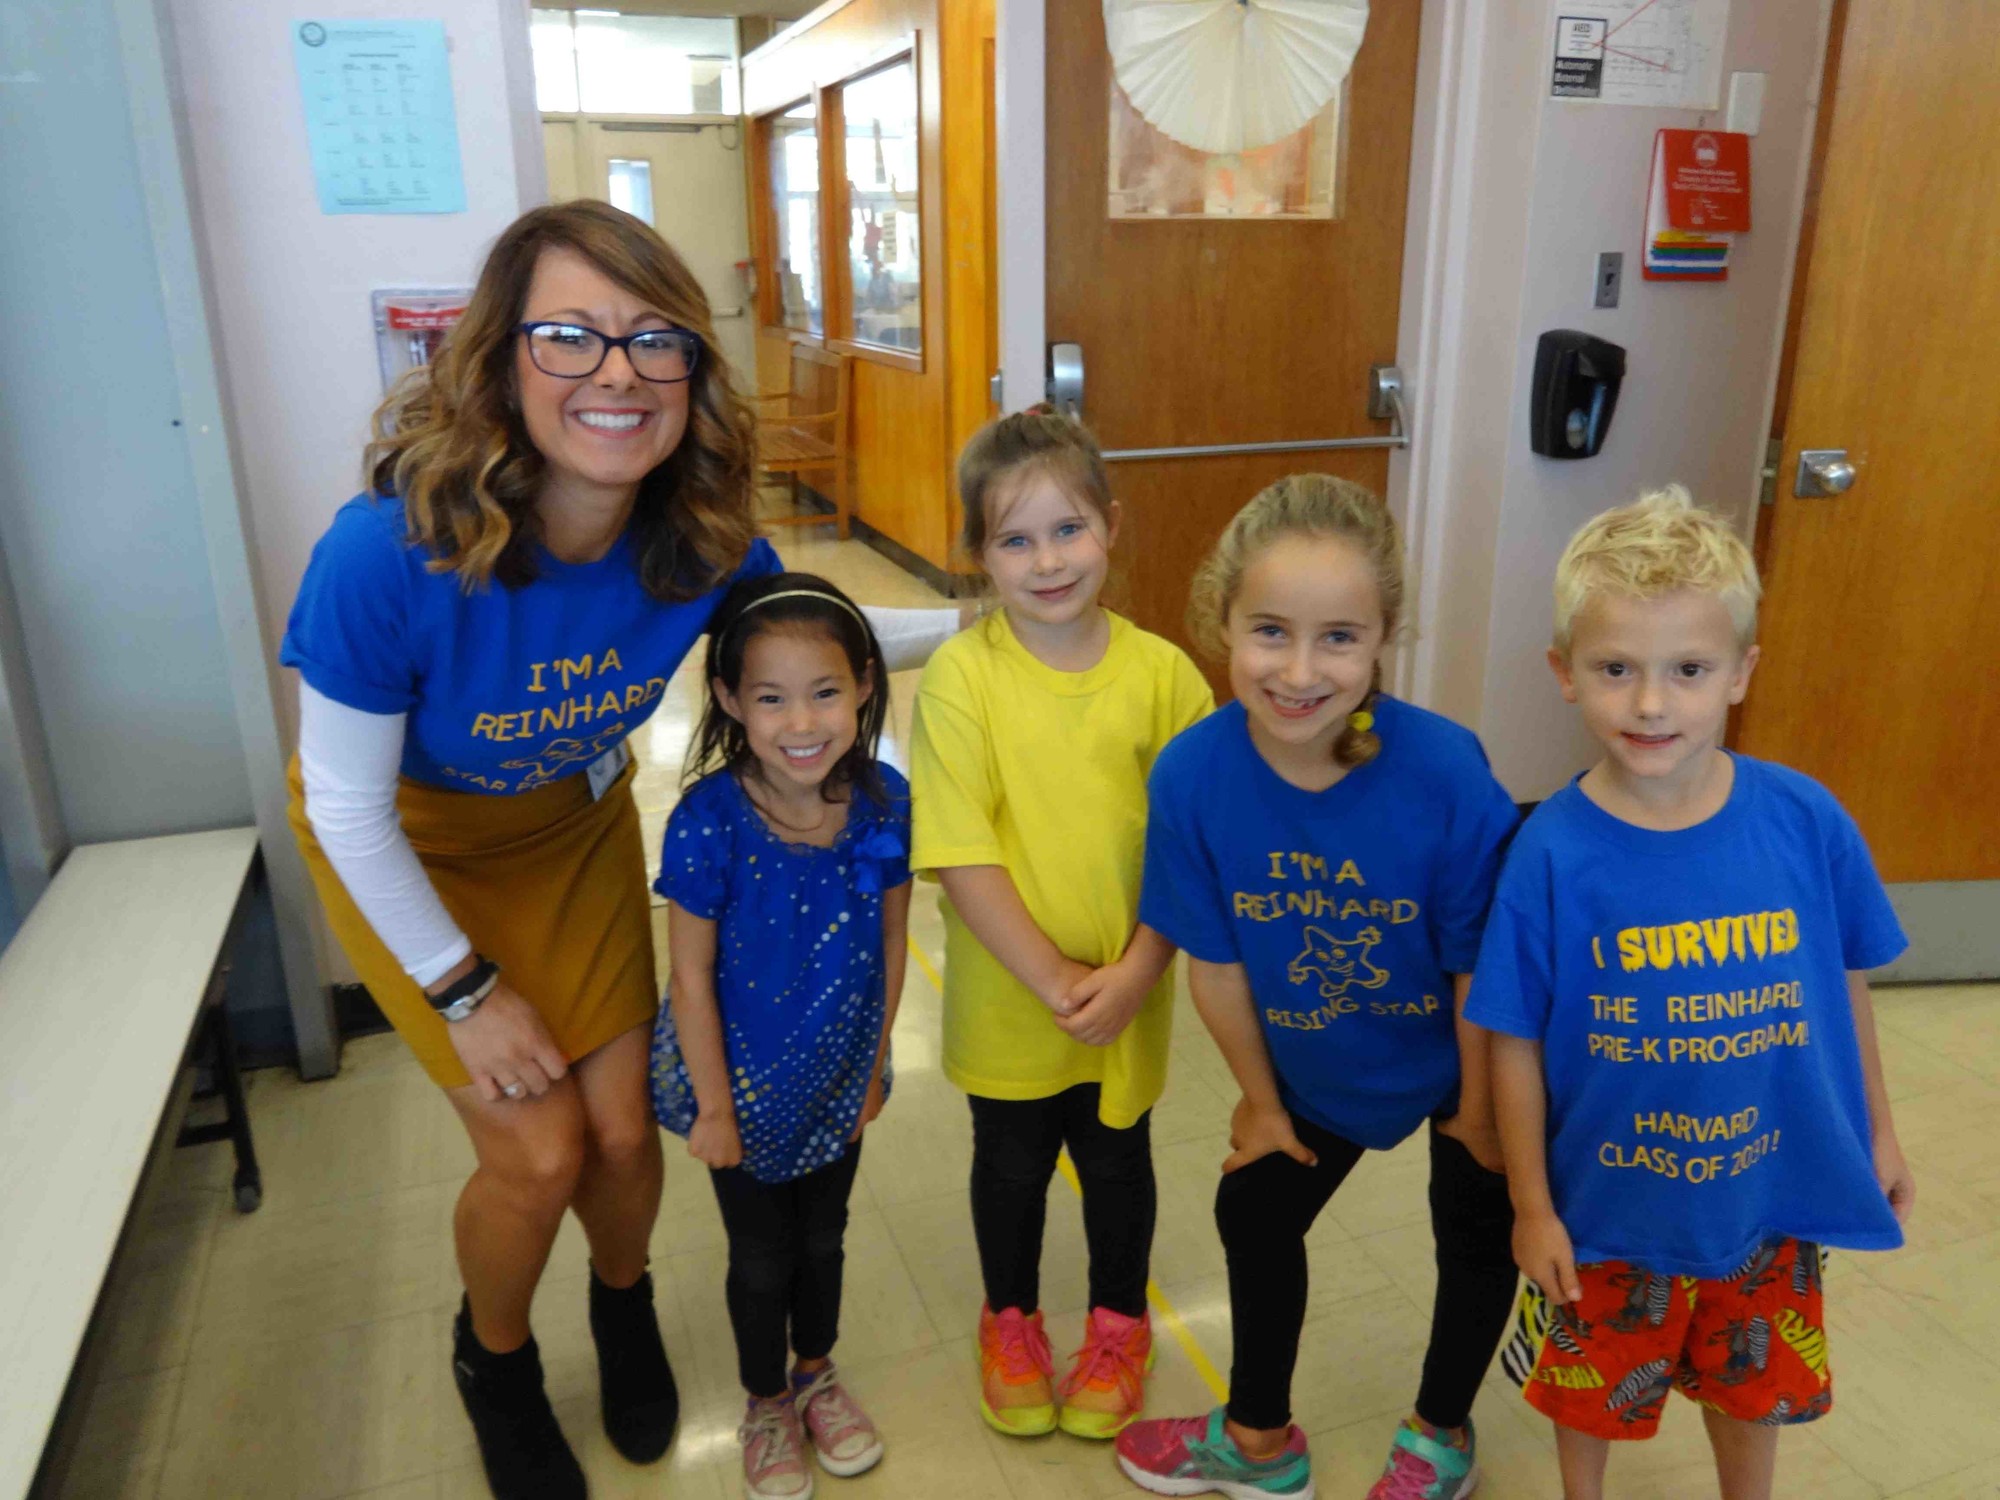 Elise Cahill, Reinhard’s assistant principal, and students celebrated School Color Day by wearing Reinhard blue and yellow.